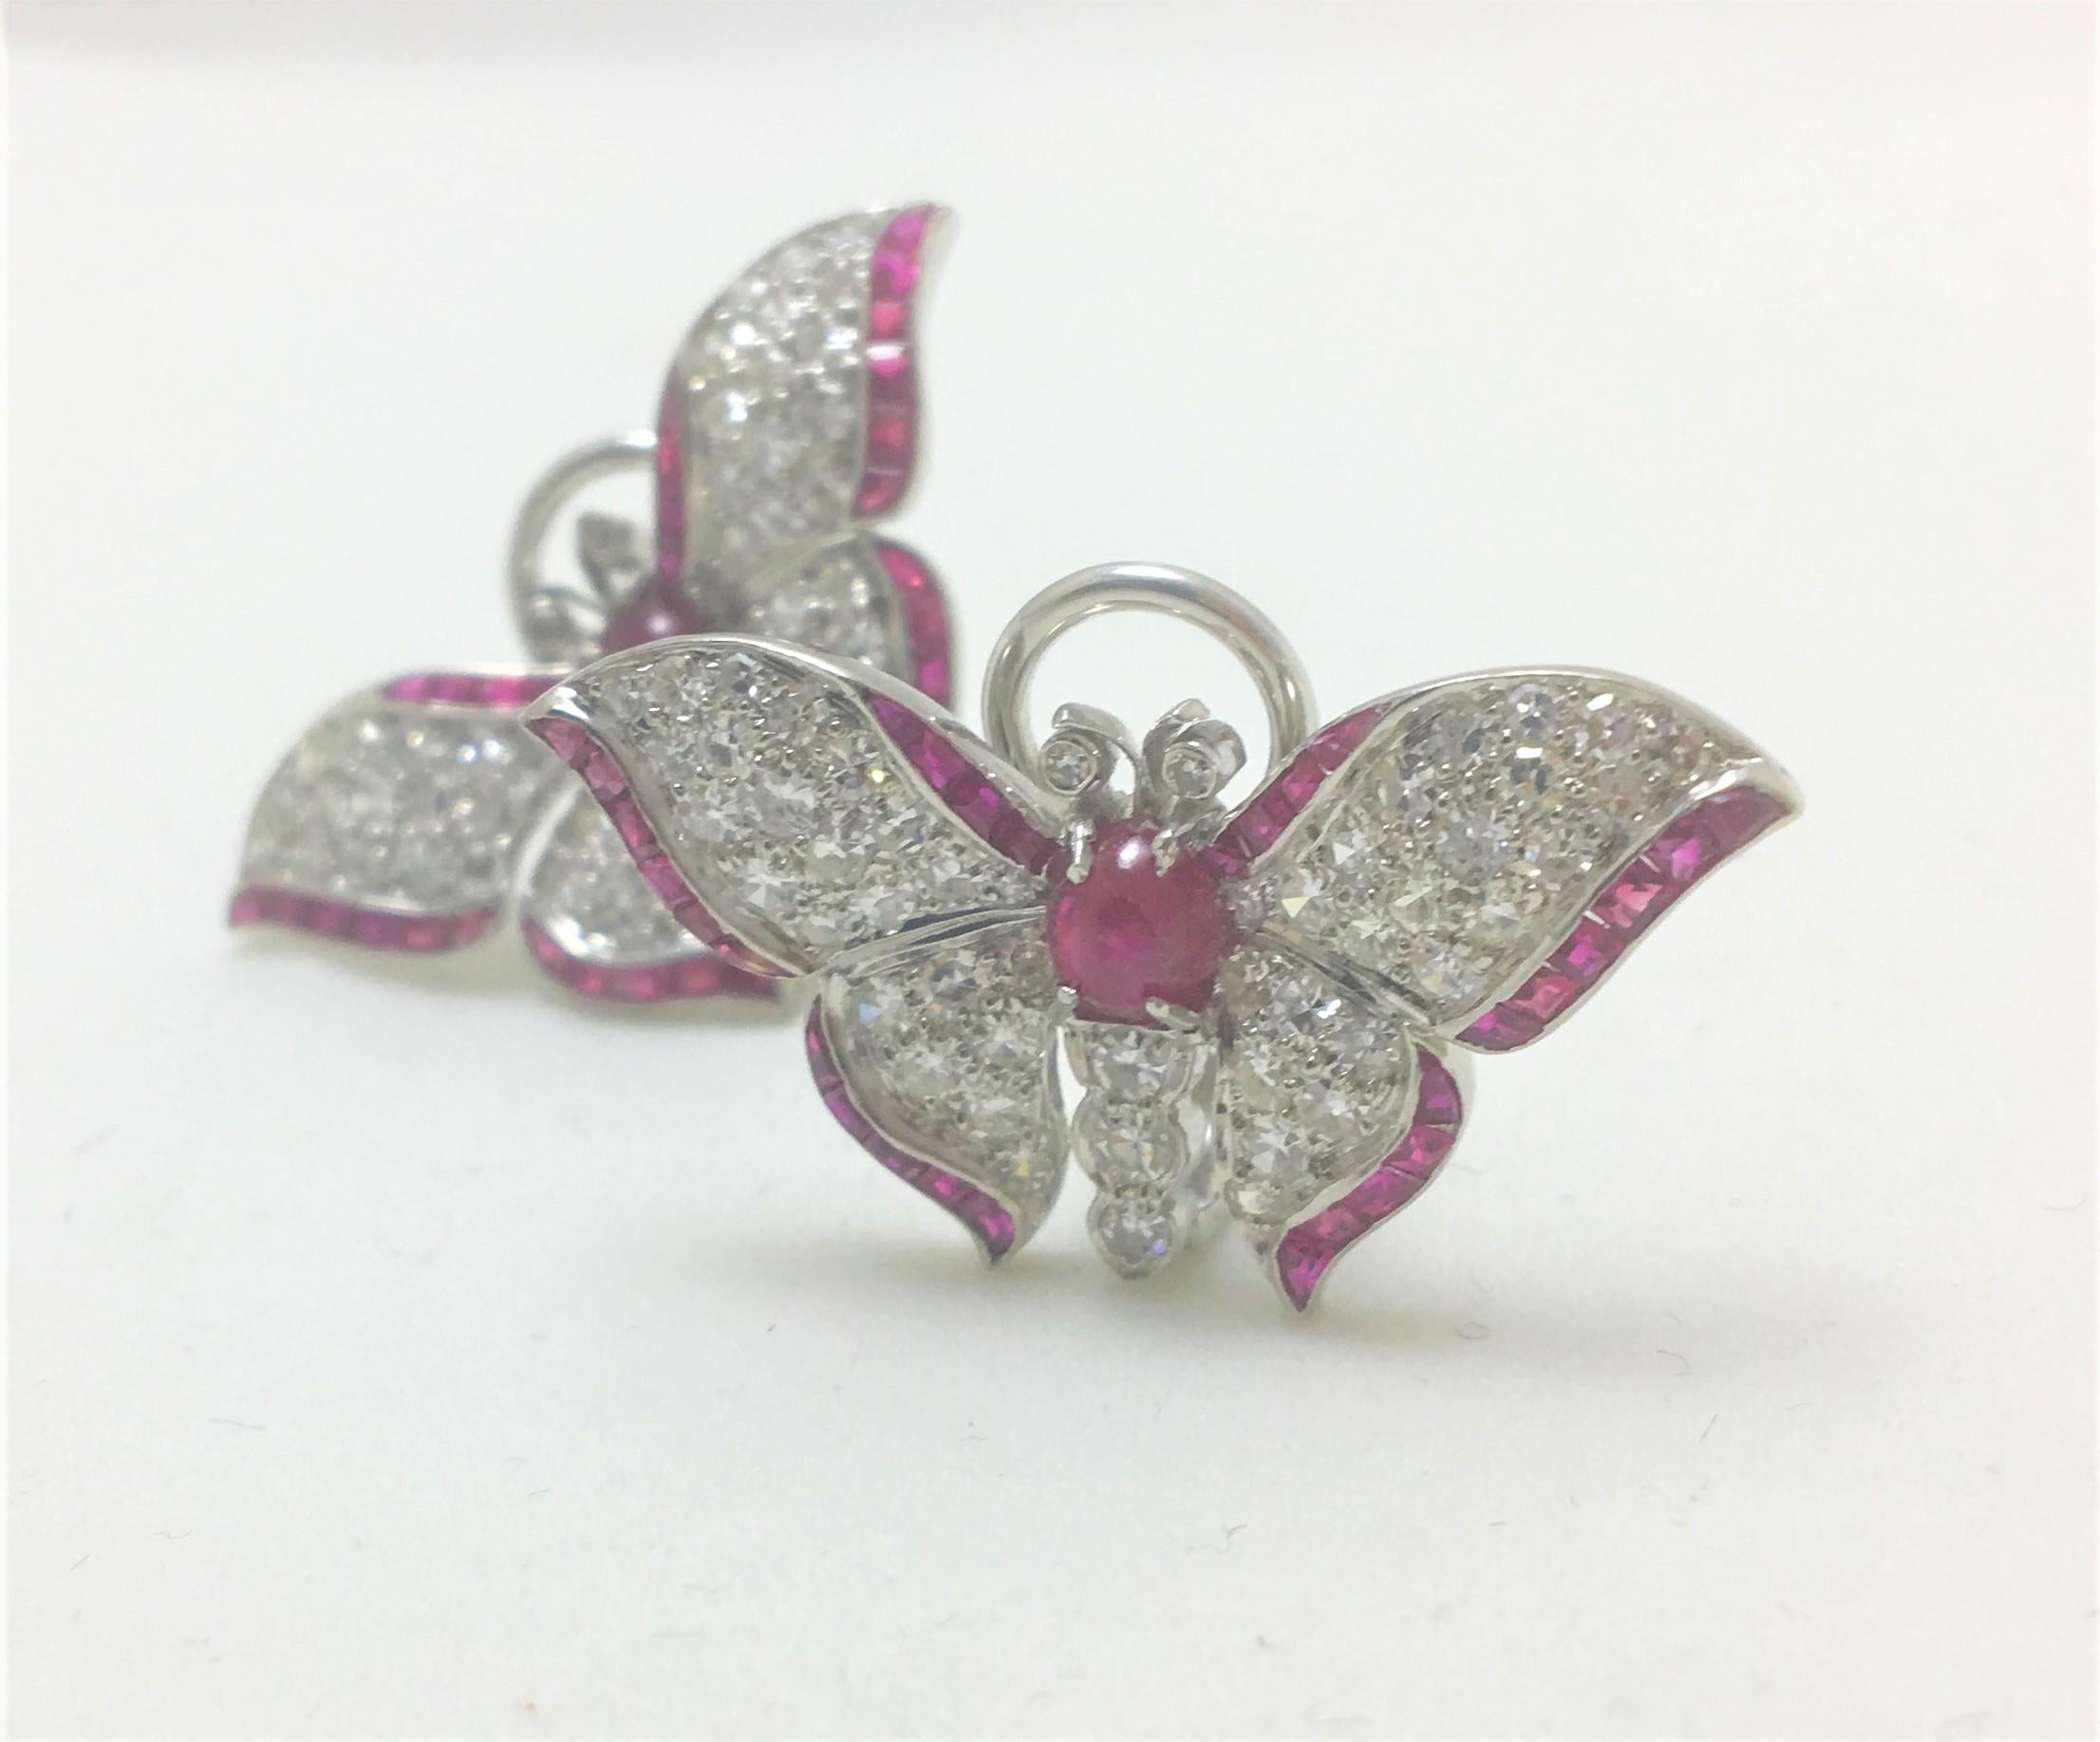 Diamond and Ruby Butterfly Earrings
Platinum- omega backs are 14KW
Each earring is outlined with 30 channel set rubies.  Center of each butterfly is set with a cabochon ruby approximately 3mmx2mm.  Each earring has 51 diamonds, each approximately